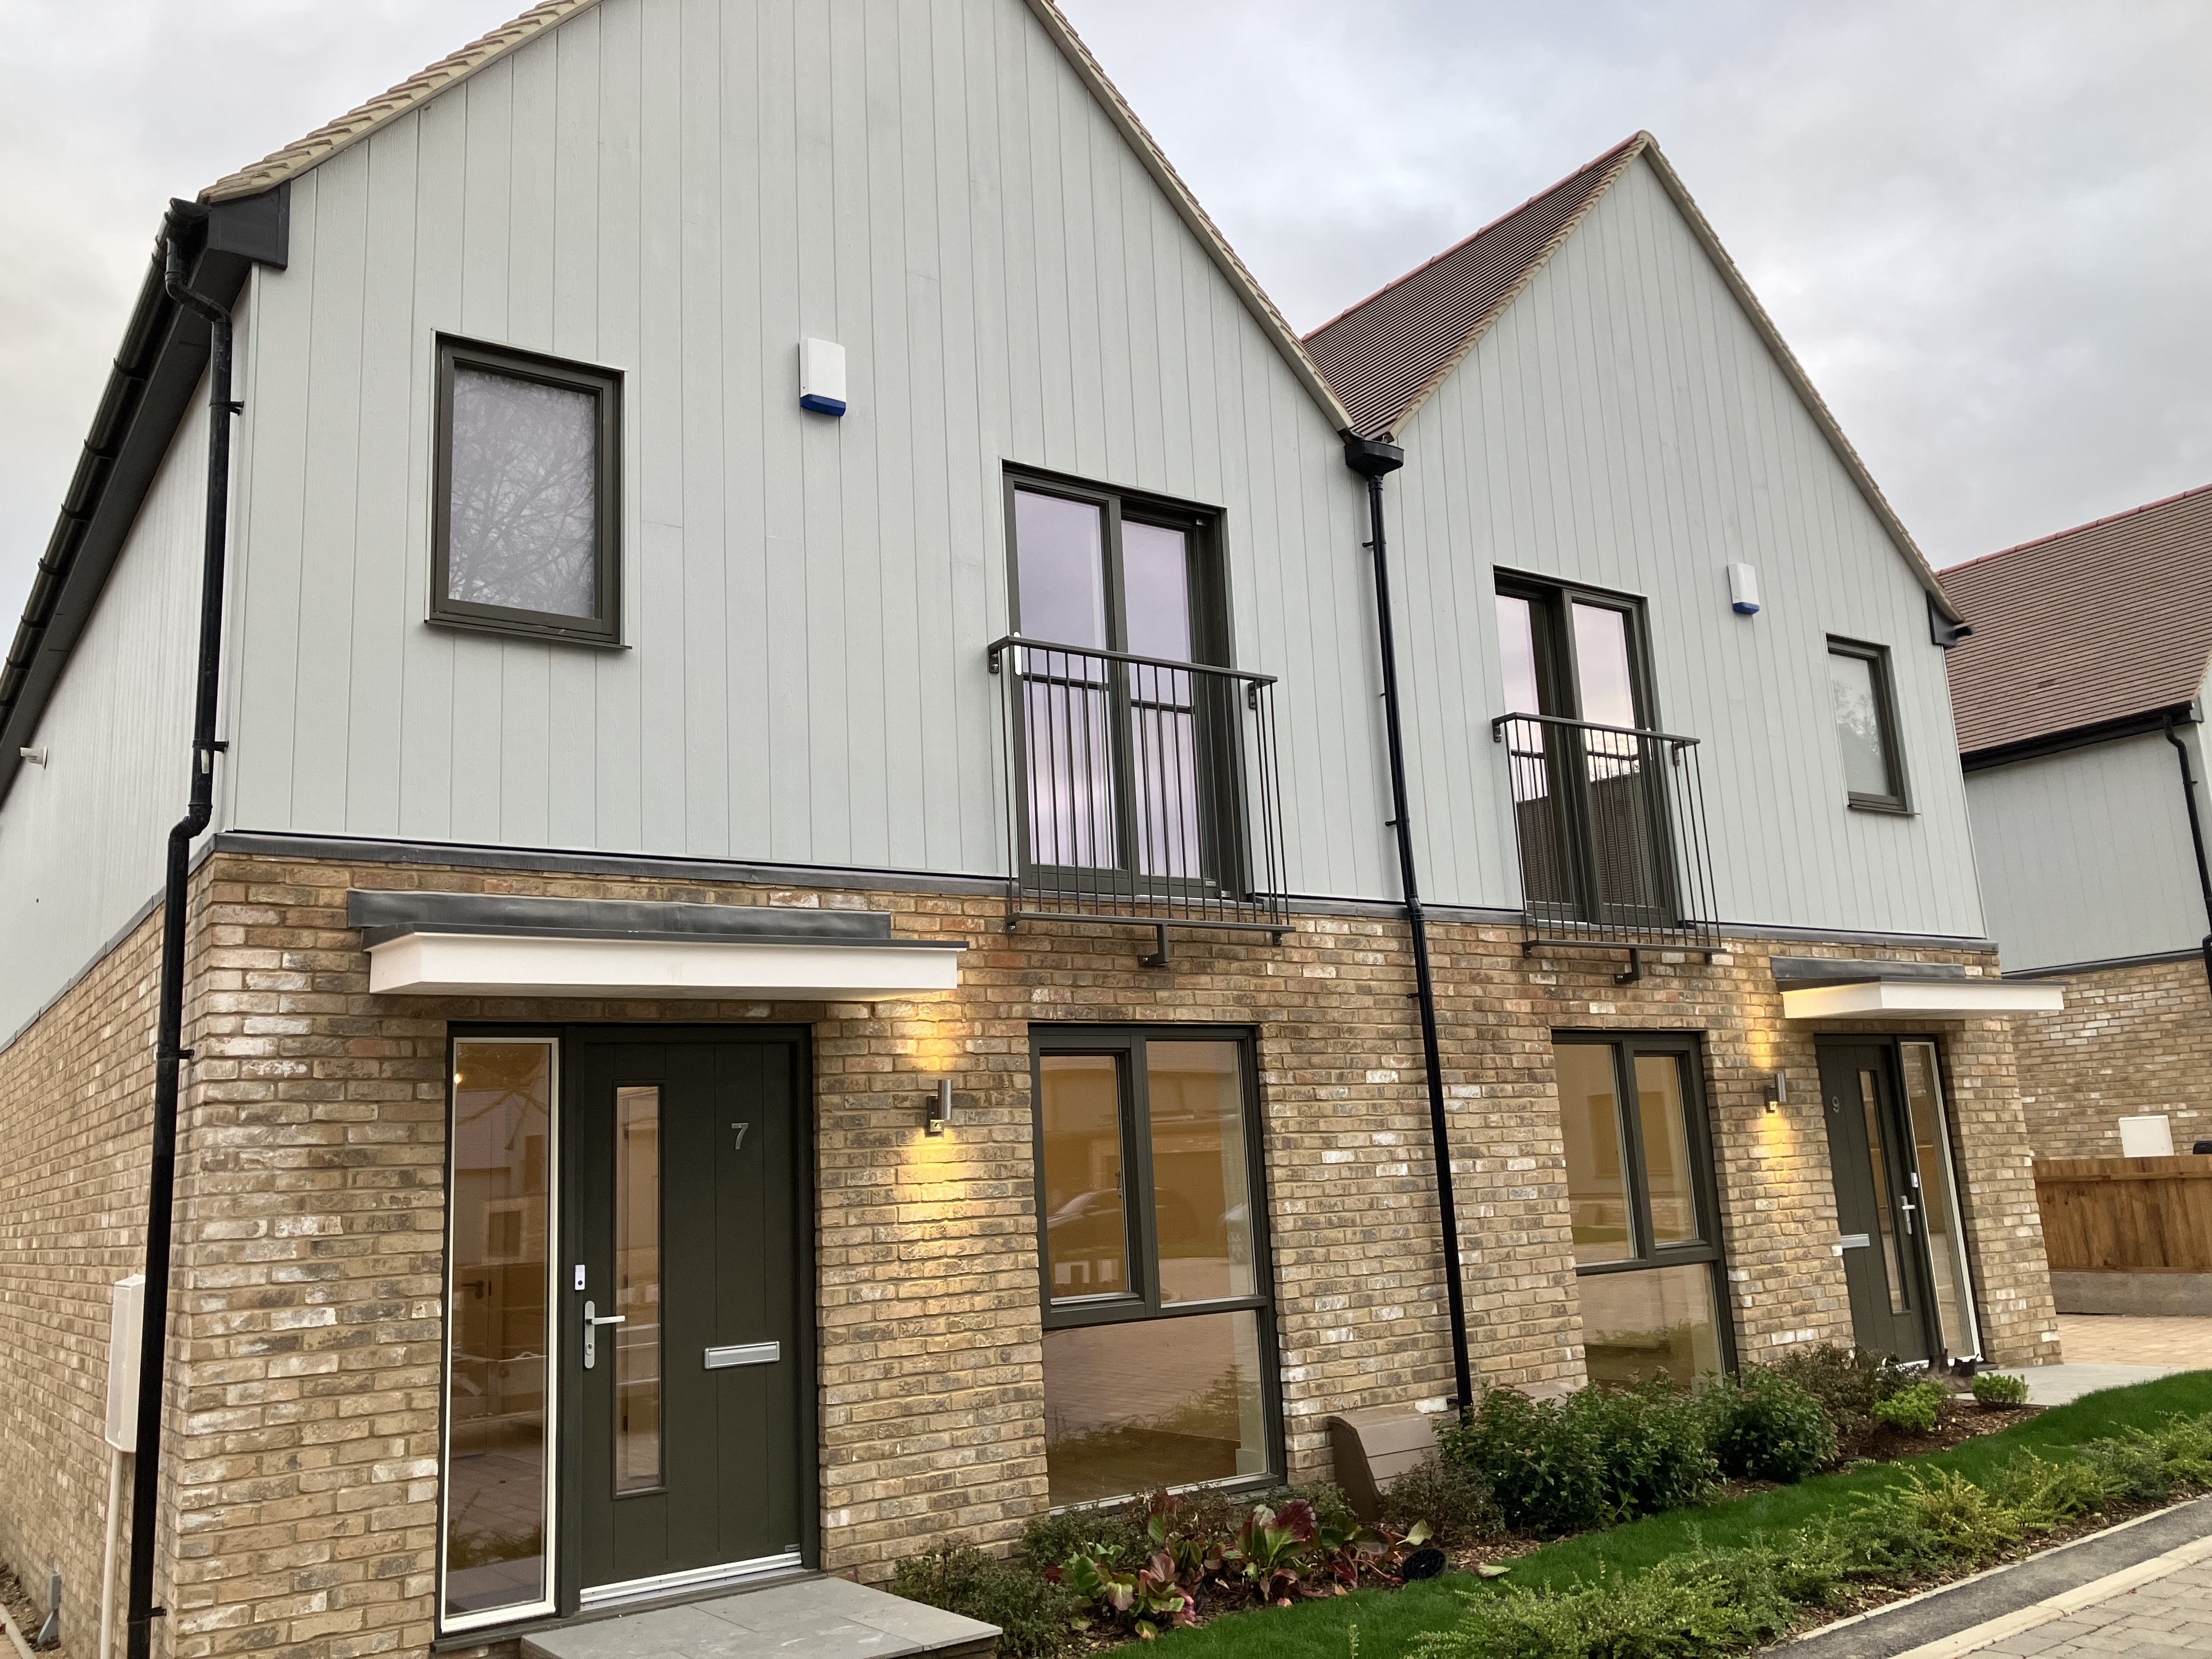 New council homes in South Cambridgeshire